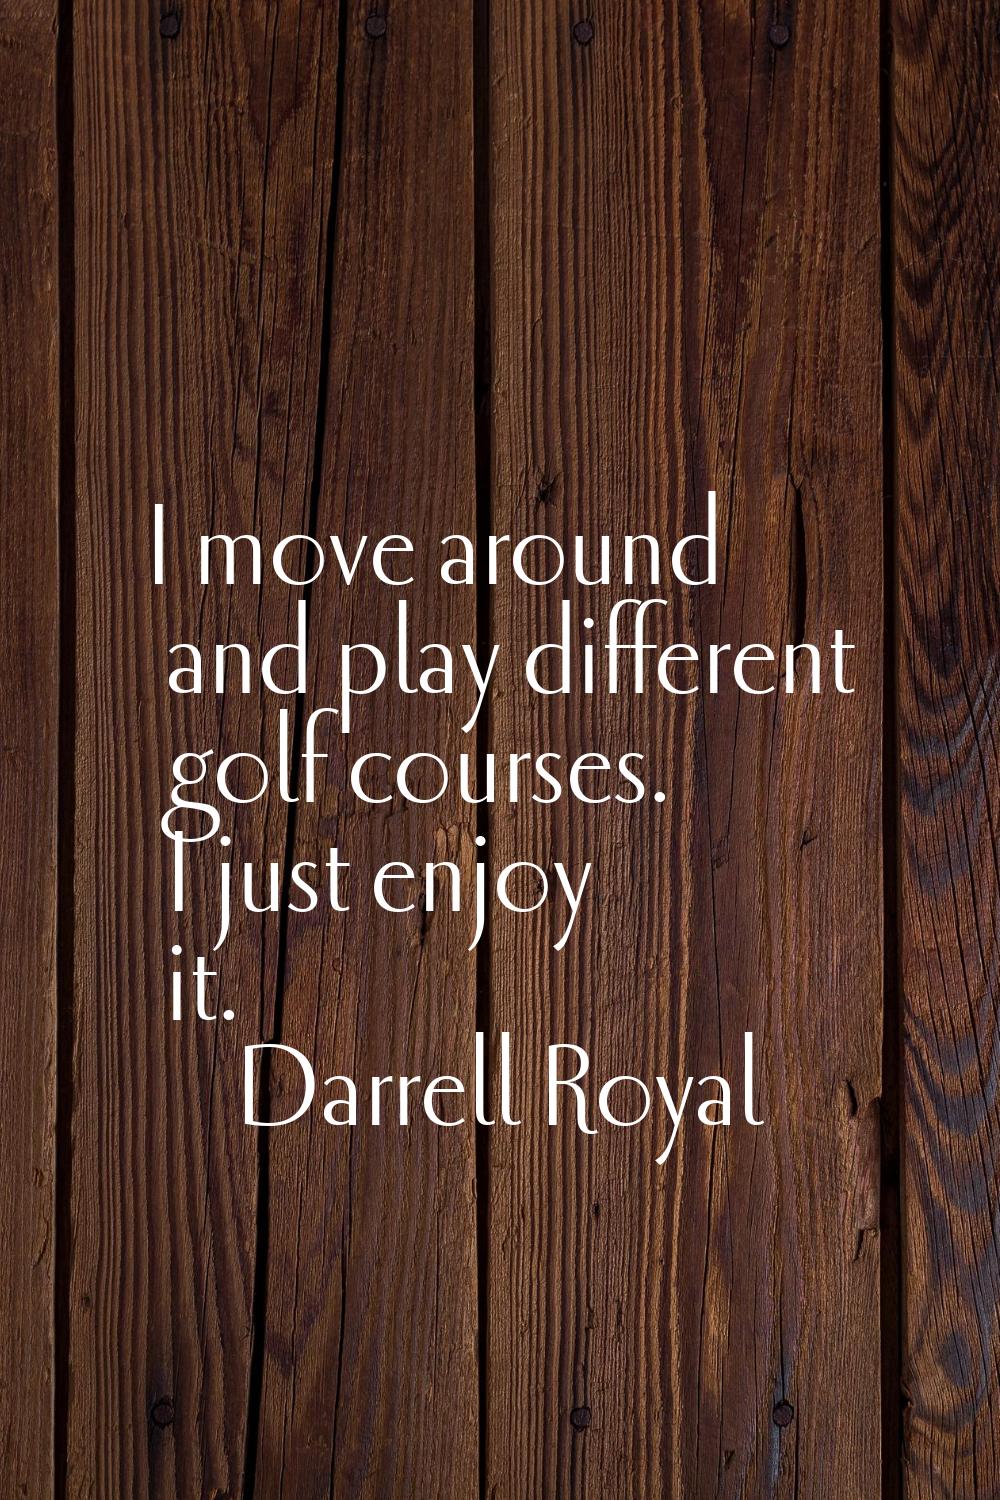 I move around and play different golf courses. I just enjoy it.